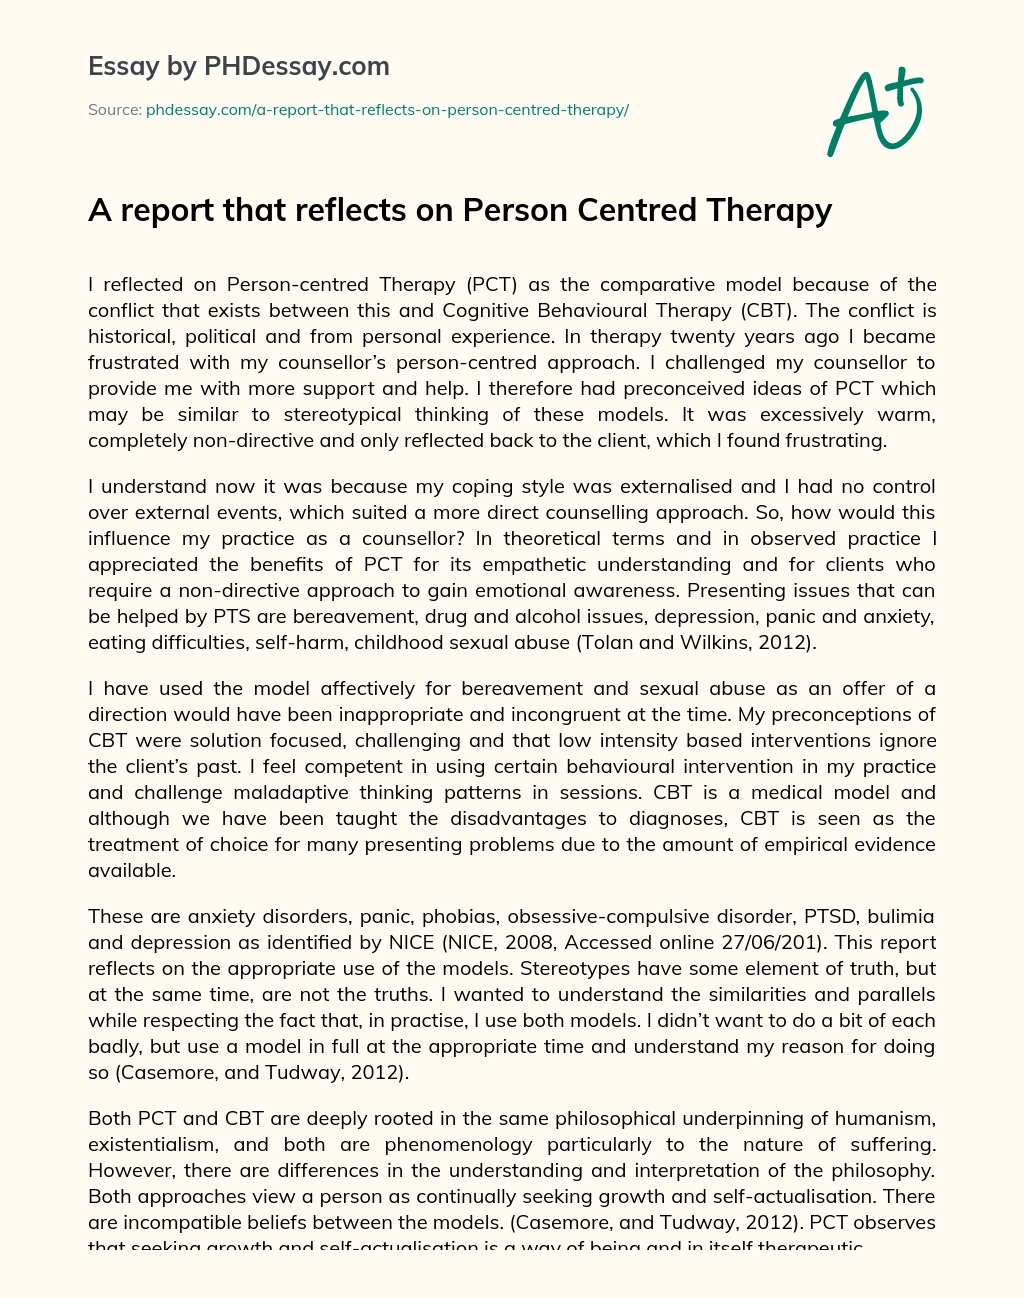 A report that reflects on Person Centred Therapy essay